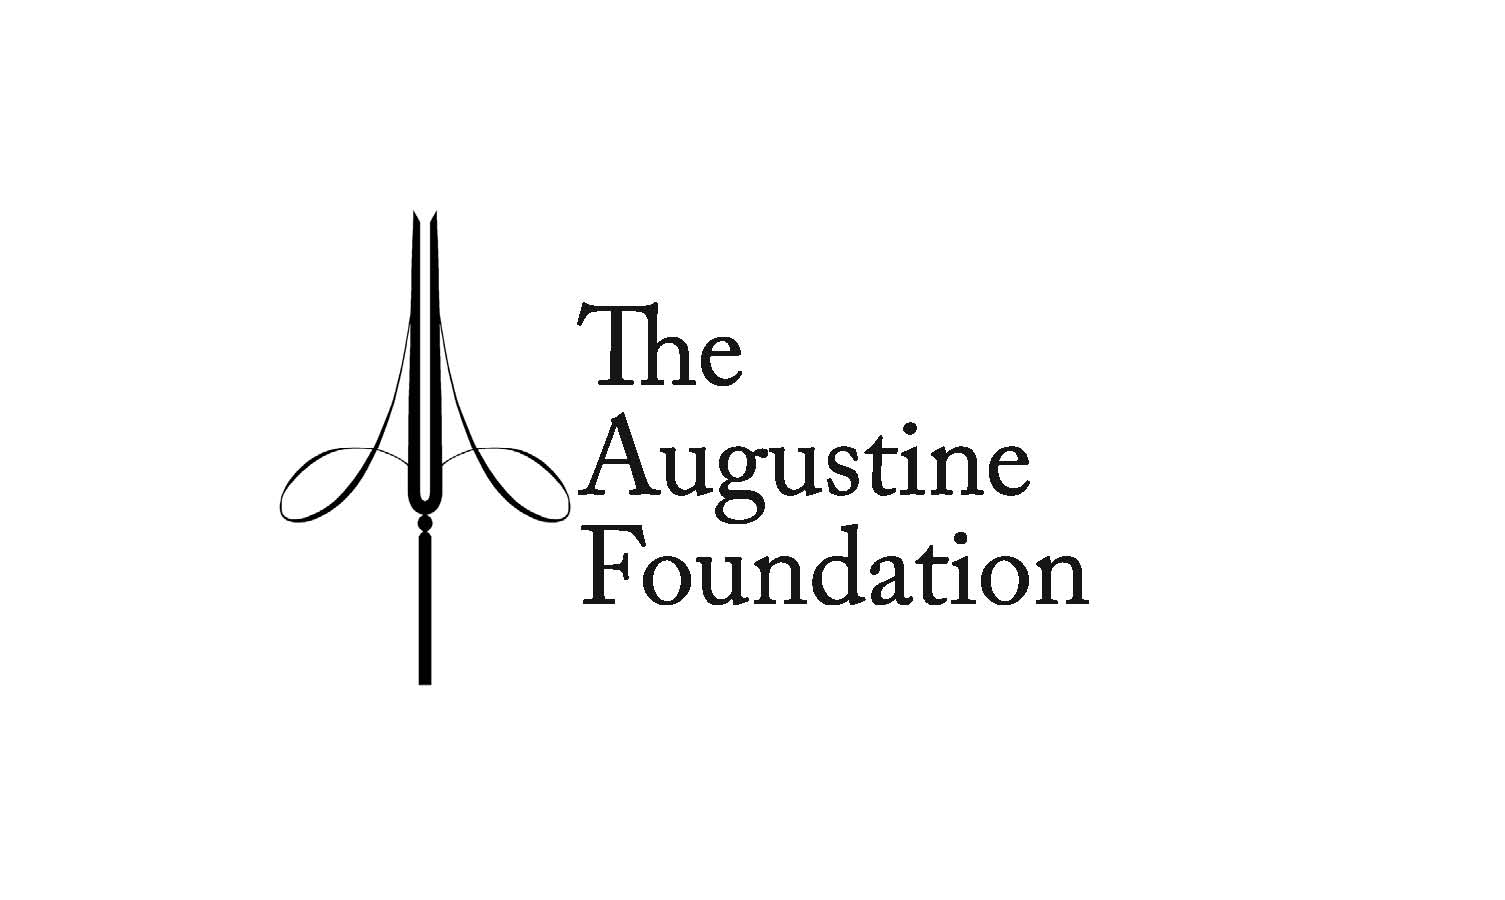 The Augustine Foundation